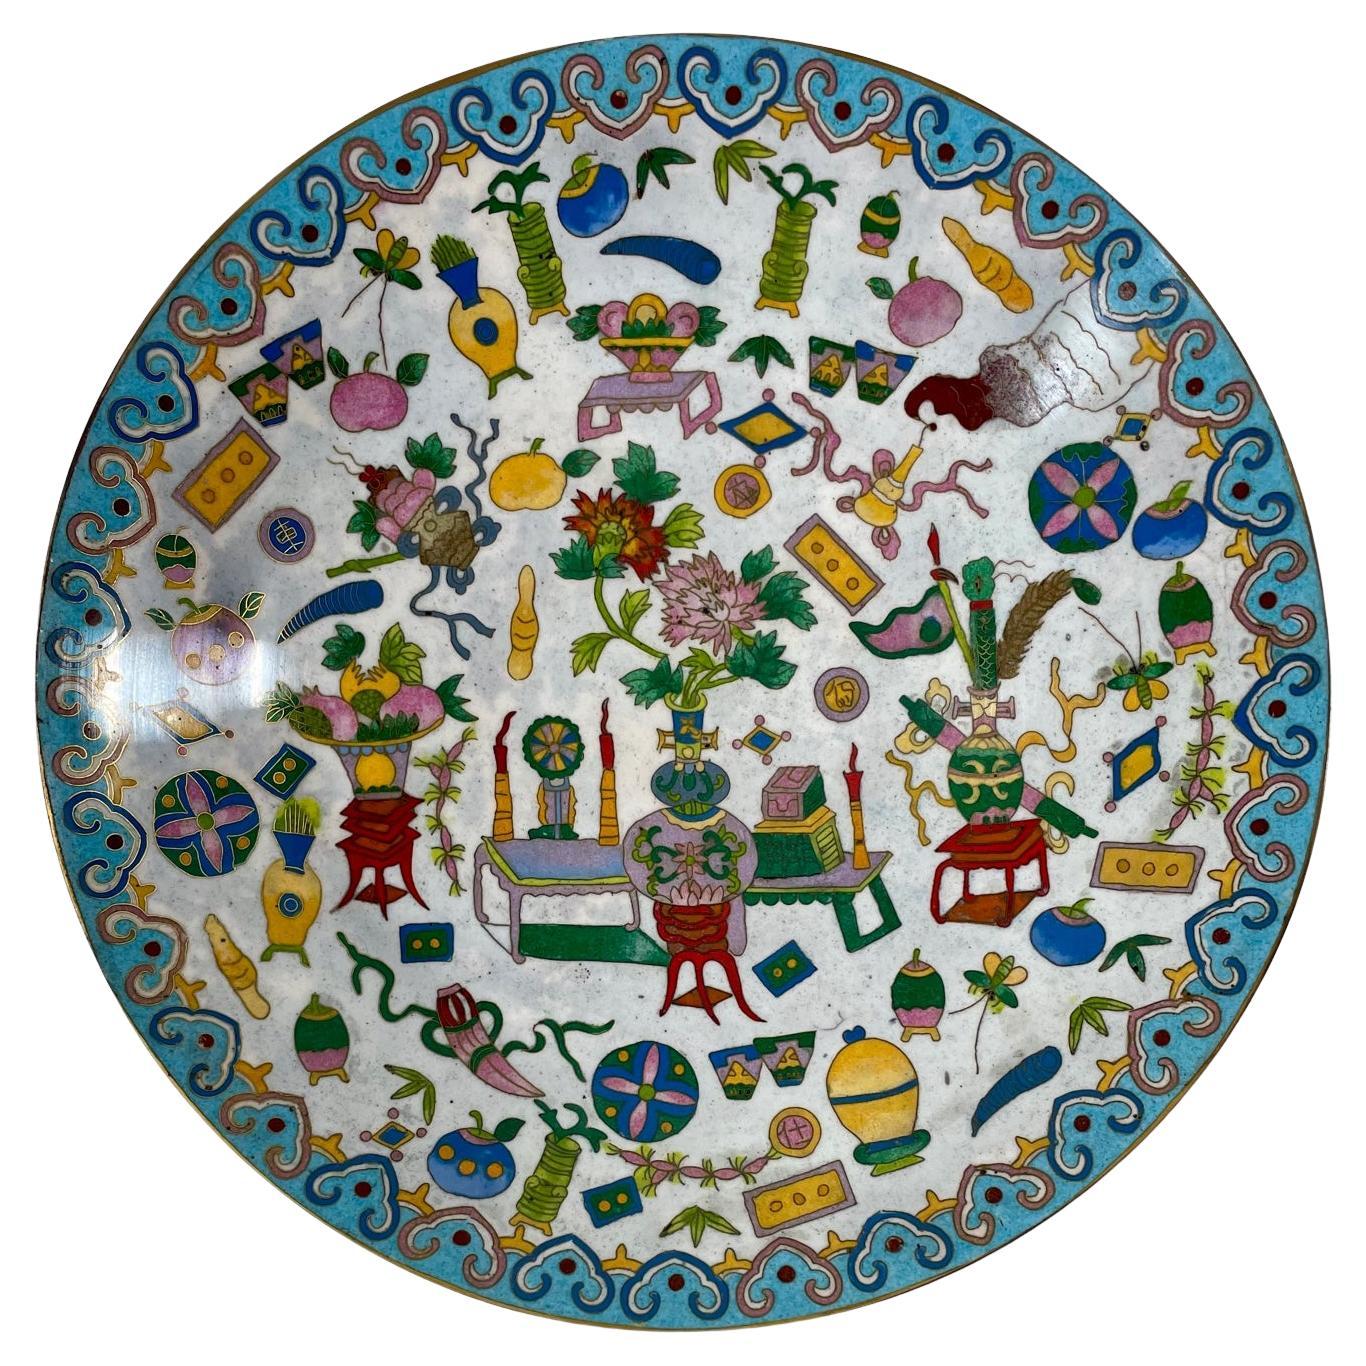 Large Chinese Qing Dynasty polychrome enamel bronze cloisonne charger.

Unusual and rare bronze Chinese Qing Dynasty Cloisonne charger. The brightly multicolored polychrome decoration features auspicious symbols, representing Chinese good luck and